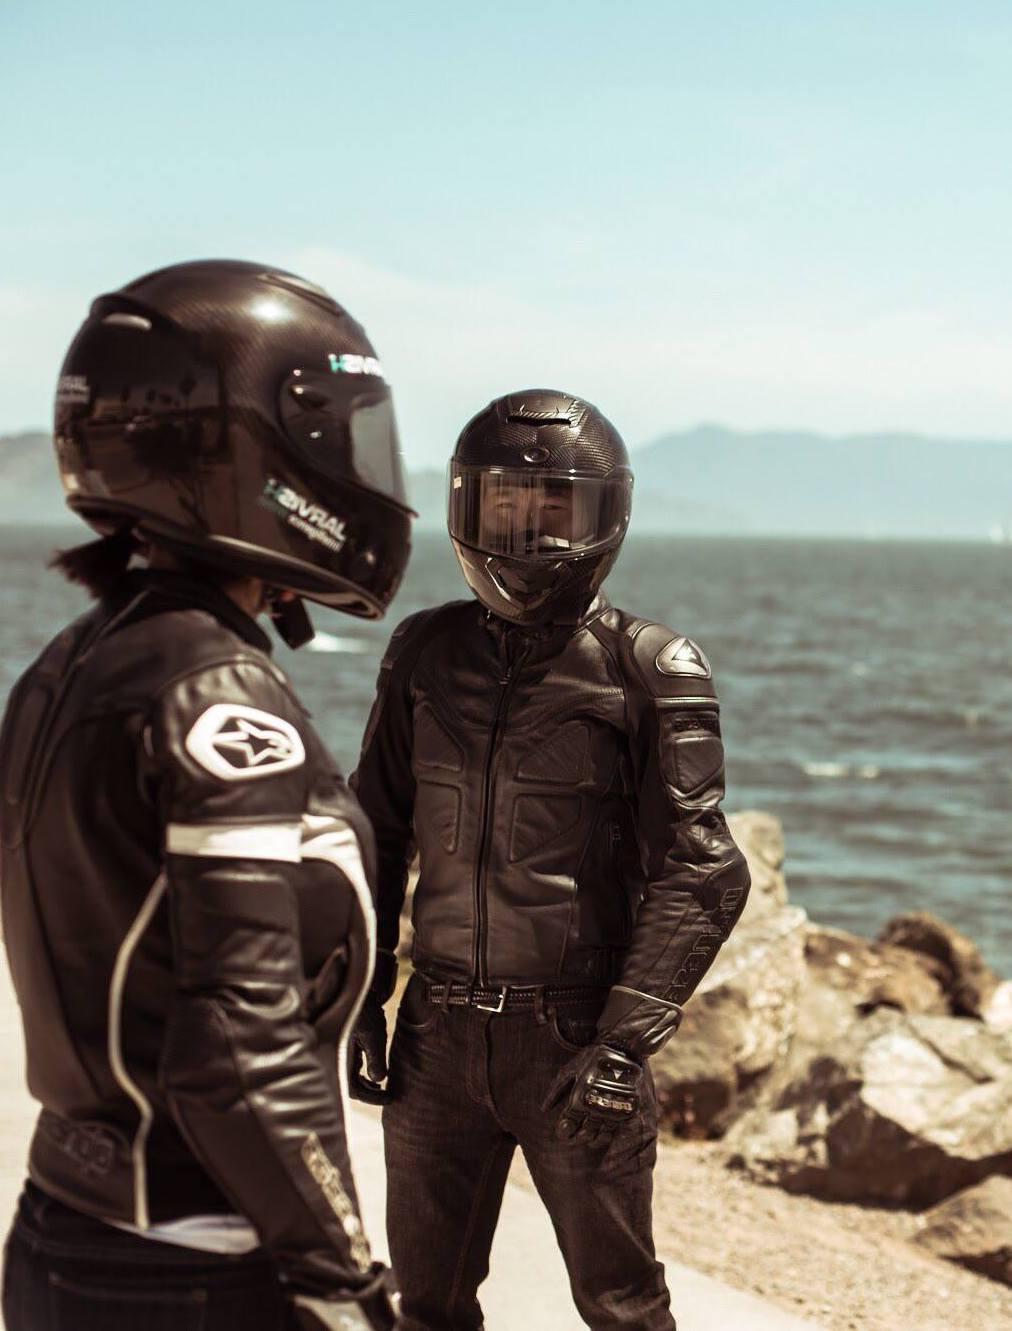 Introducing the smart motorcycle helmet of the near future | HERE